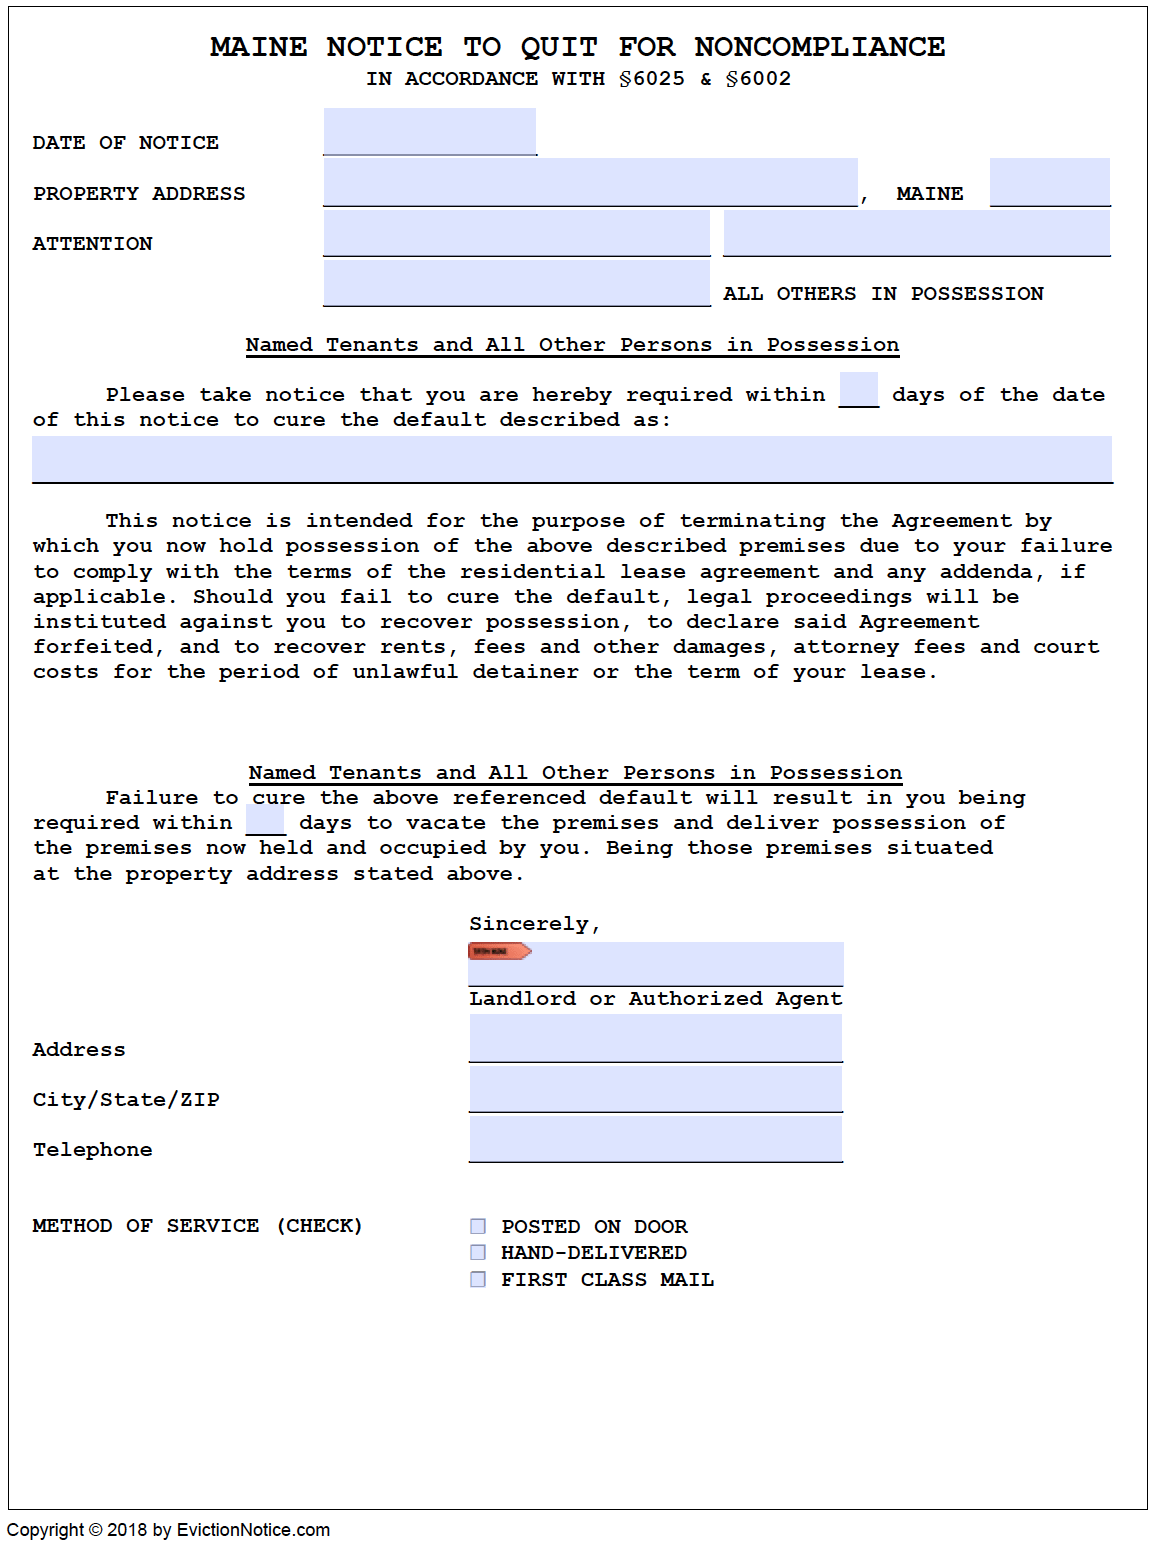 free-maine-7-day-notice-to-comply-or-quit-pdf